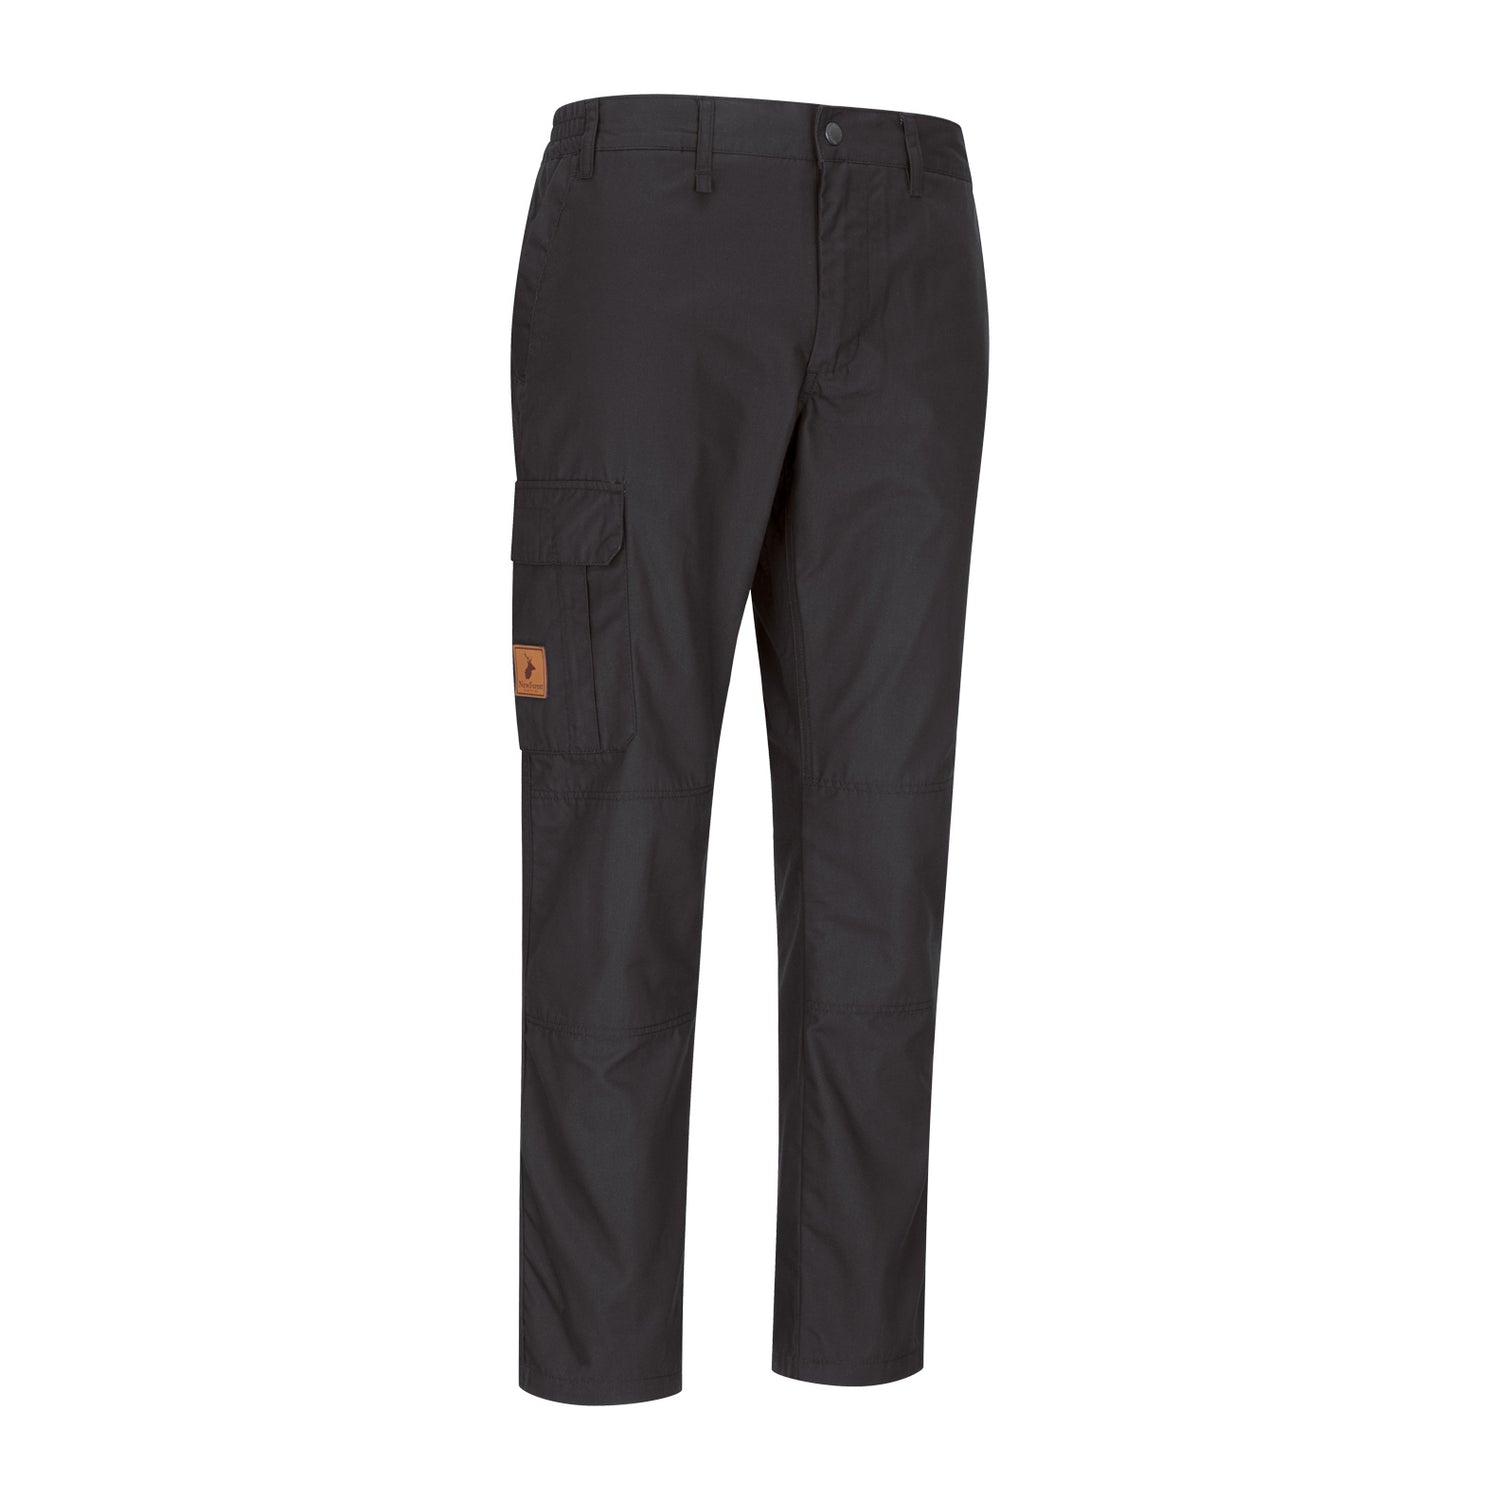 New Forest Trail Trouser